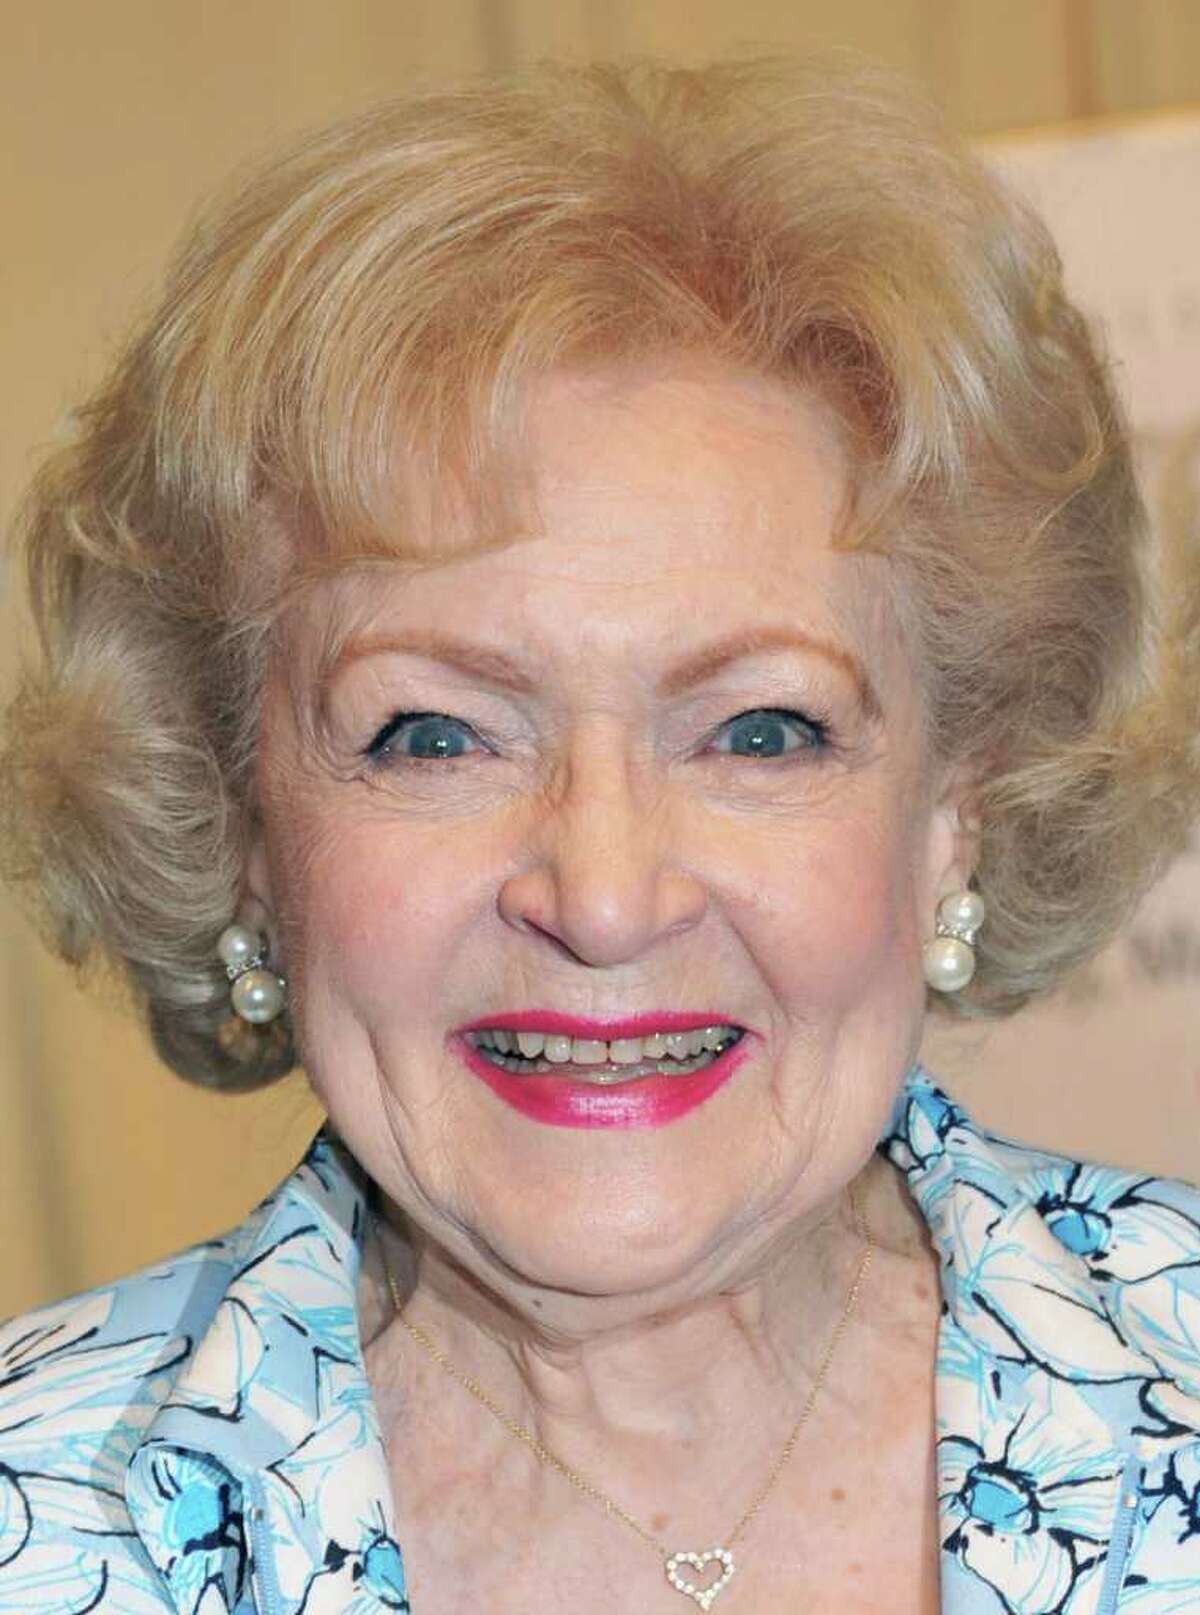 NEW YORK, NY - MAY 06: Actress Betty White signs copies of "If You Ask Me (And Of Course You Won't)" at Barnes & Noble, 5th Avenue on May 6, 2011 in New York City. (Photo by Slaven Vlasic/Getty Images) *** Local Caption *** Betty White;